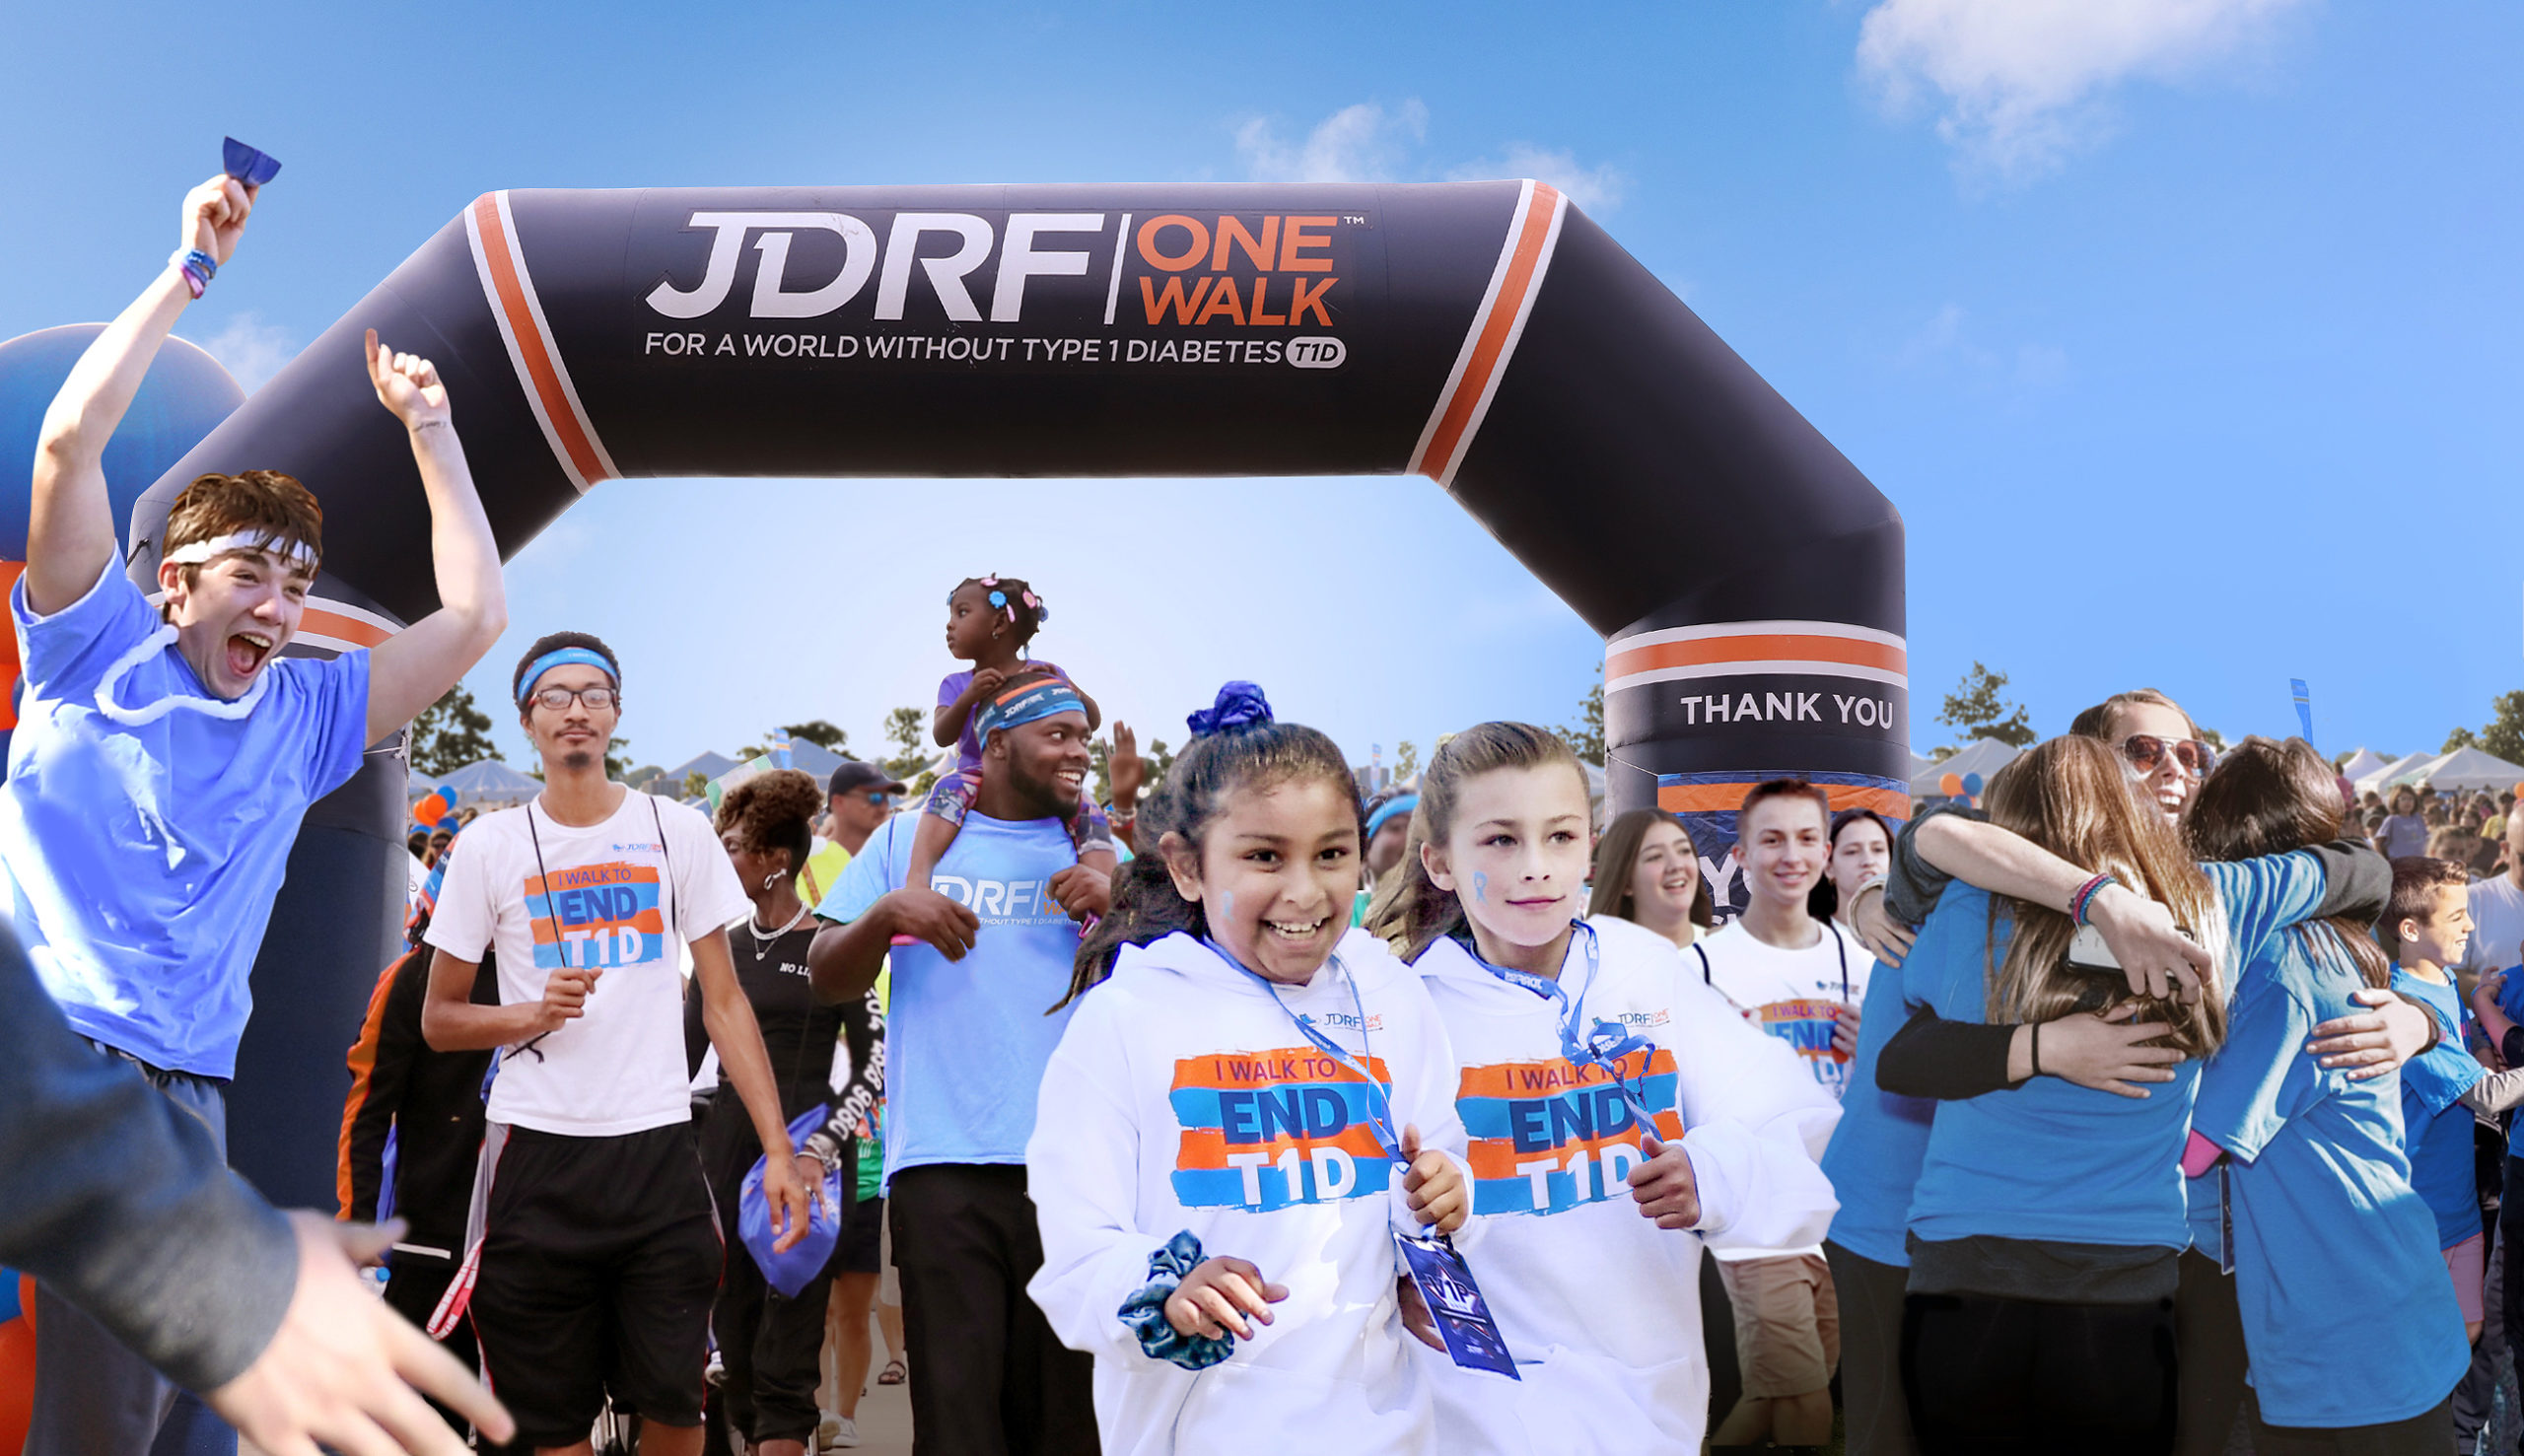 jdrf one walk families at arch